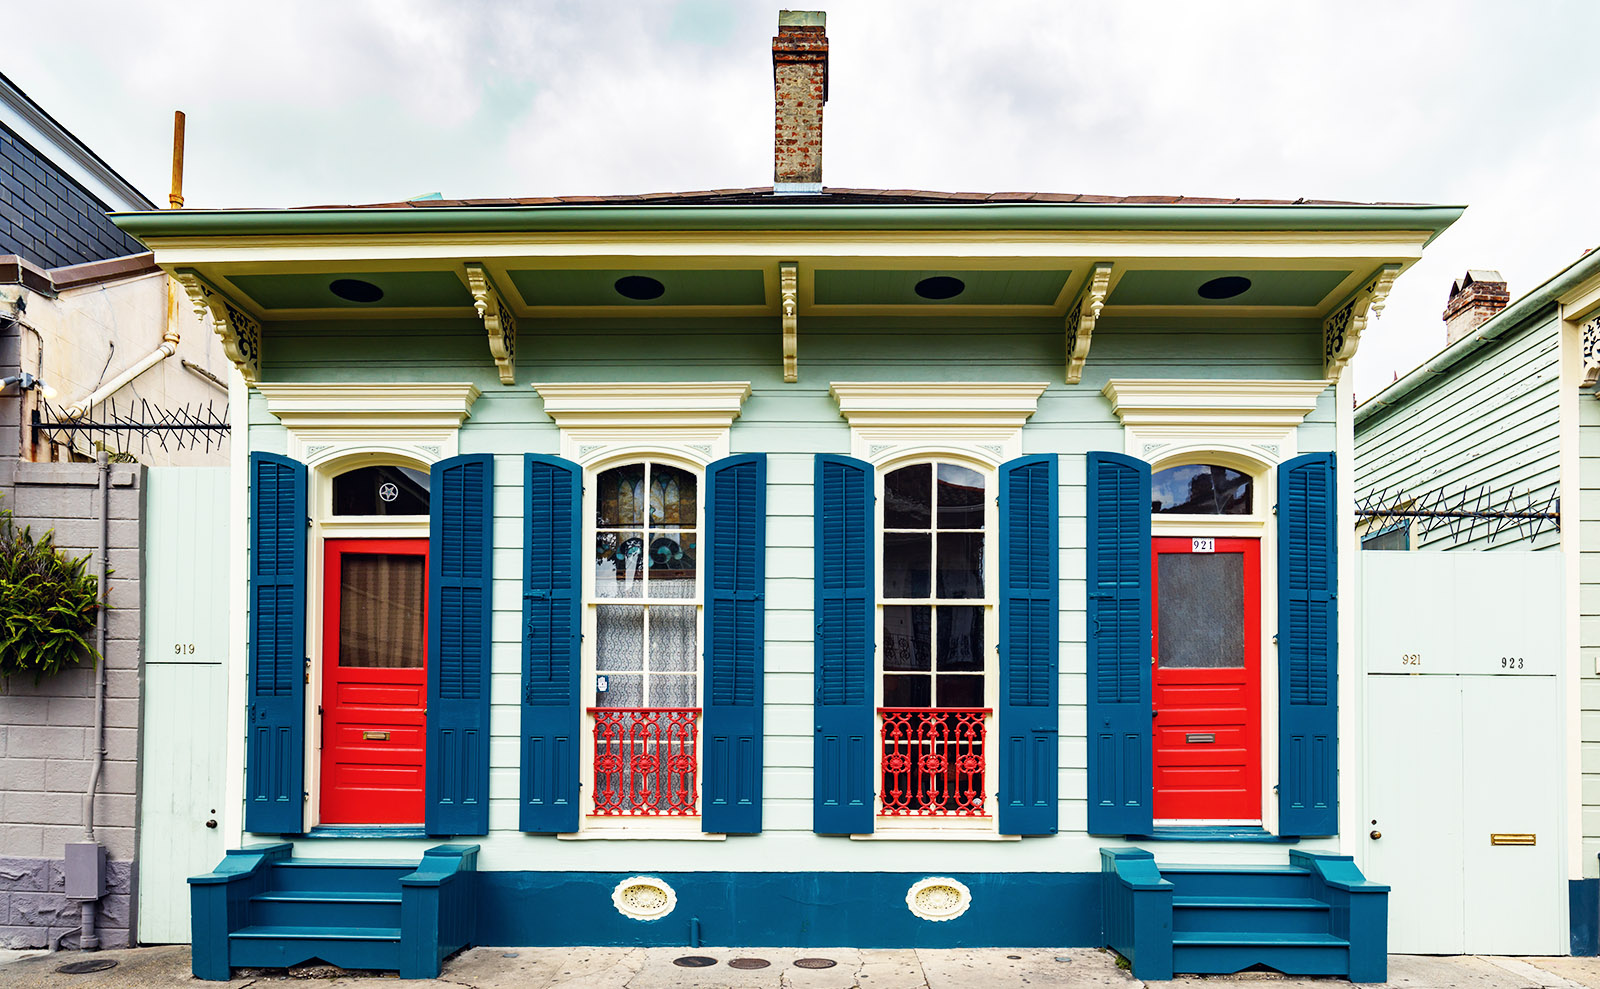 5 Great Books Set in New Orleans That We Love